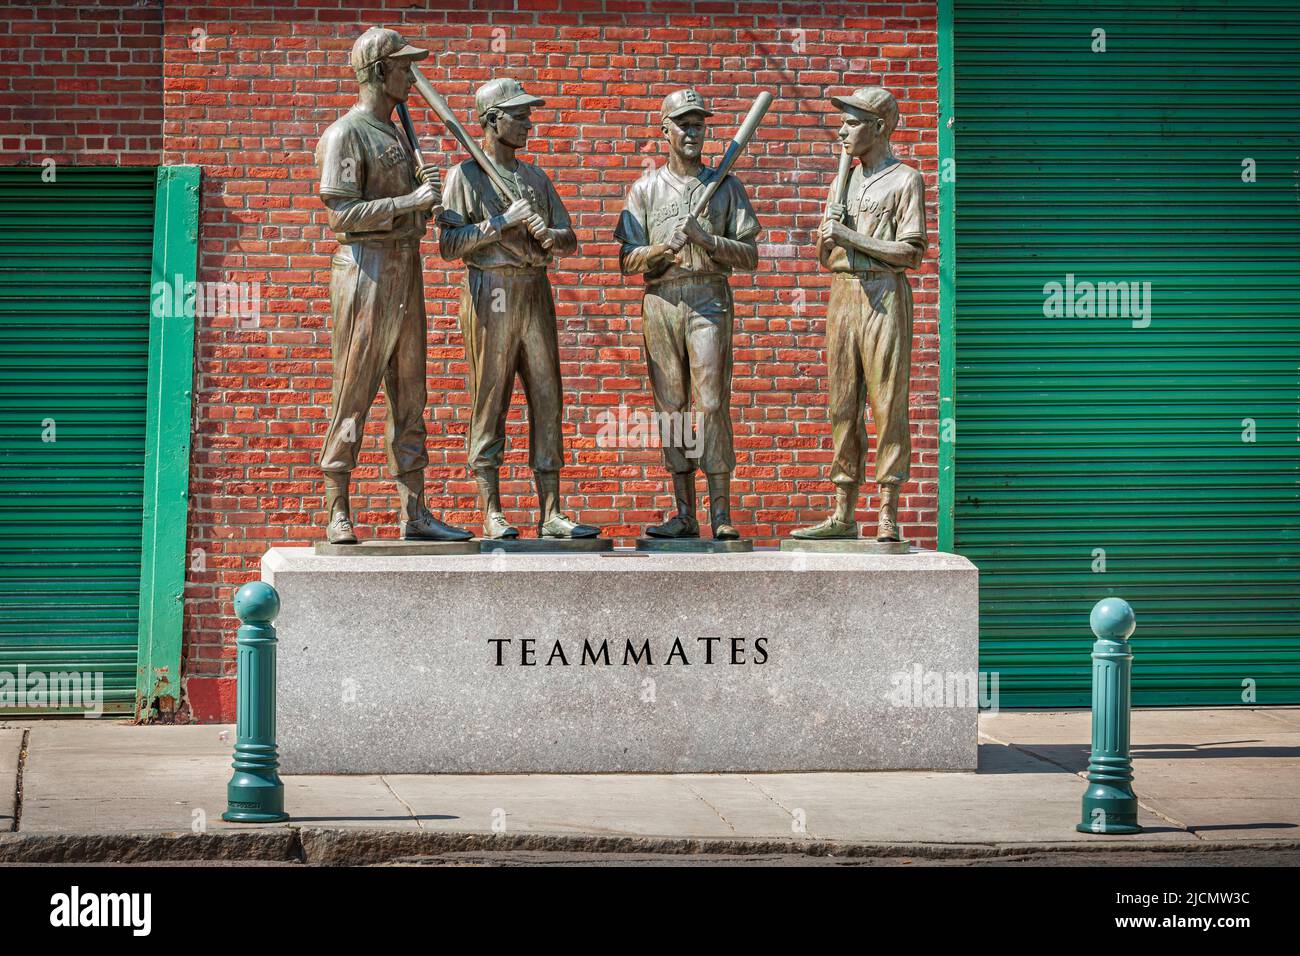 The bronze 'Teammates' statue, by artist Antonio Tobias Mendez, can be found outside Fenway Park featuring the Boston Red Sox greats Ted Williams, lef Stock Photo